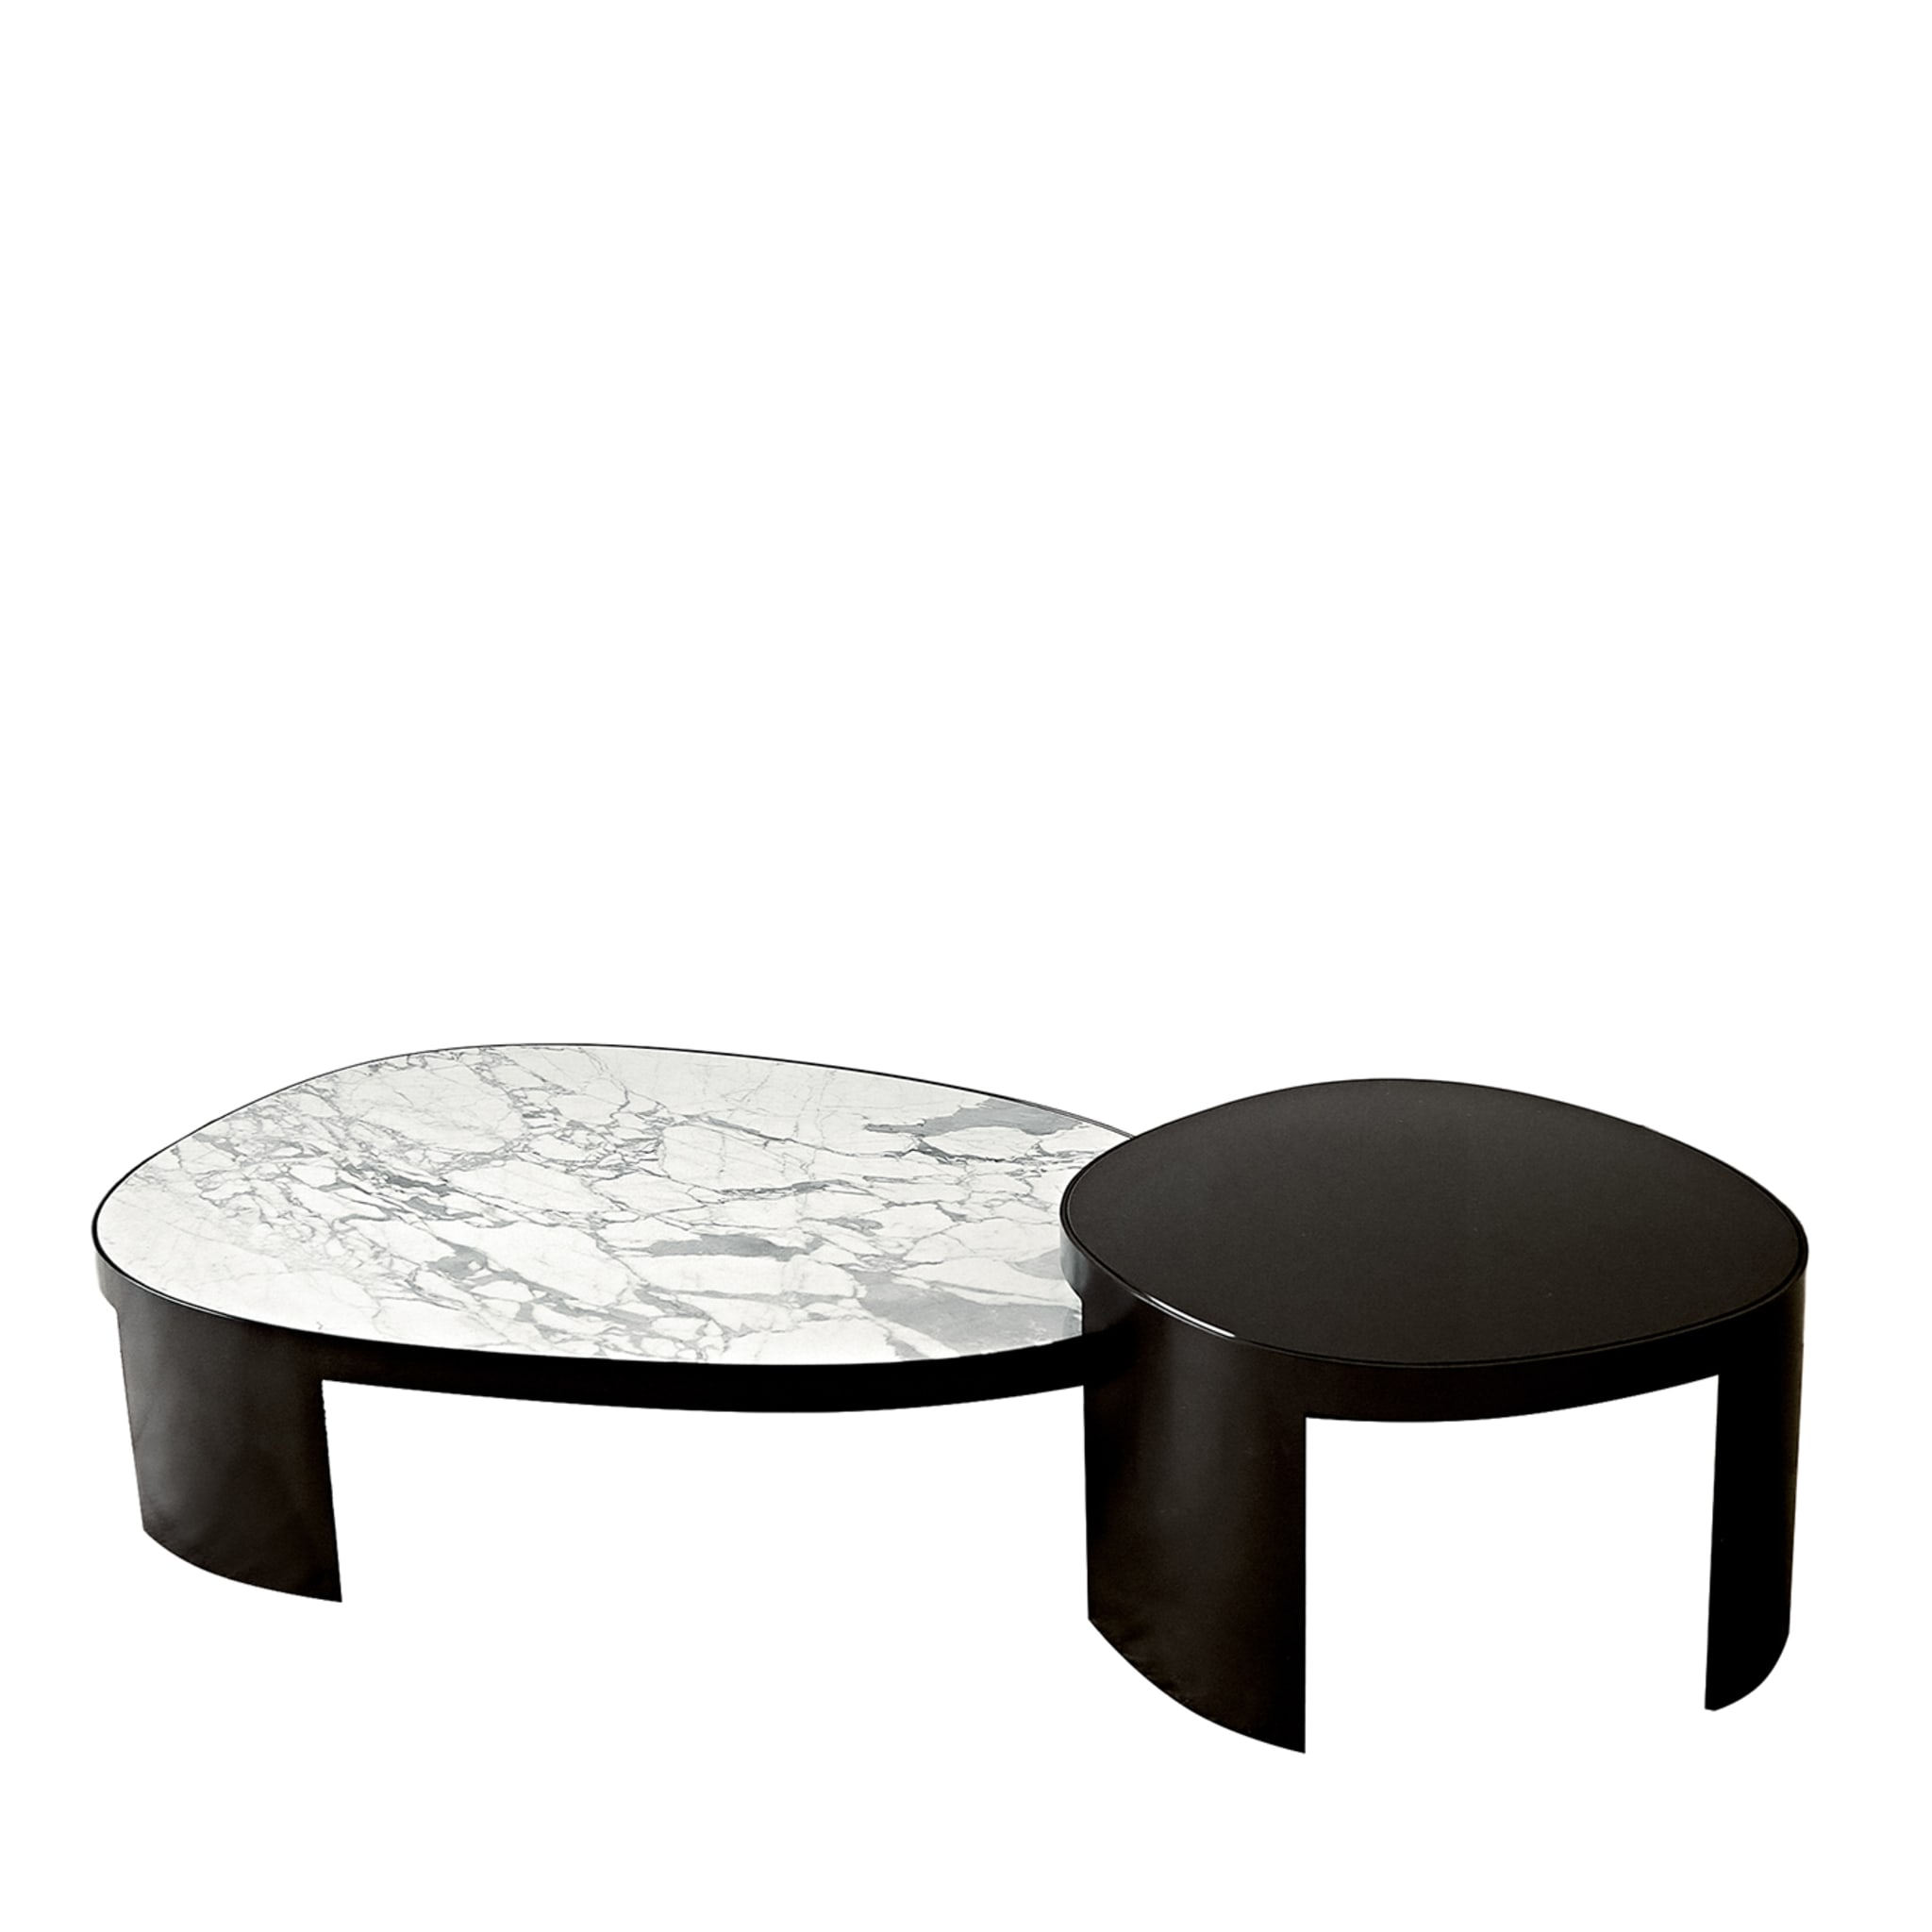 Kyoto Set of 2 Coffee Tables by Ludovica + Roberto Palomba - Main view